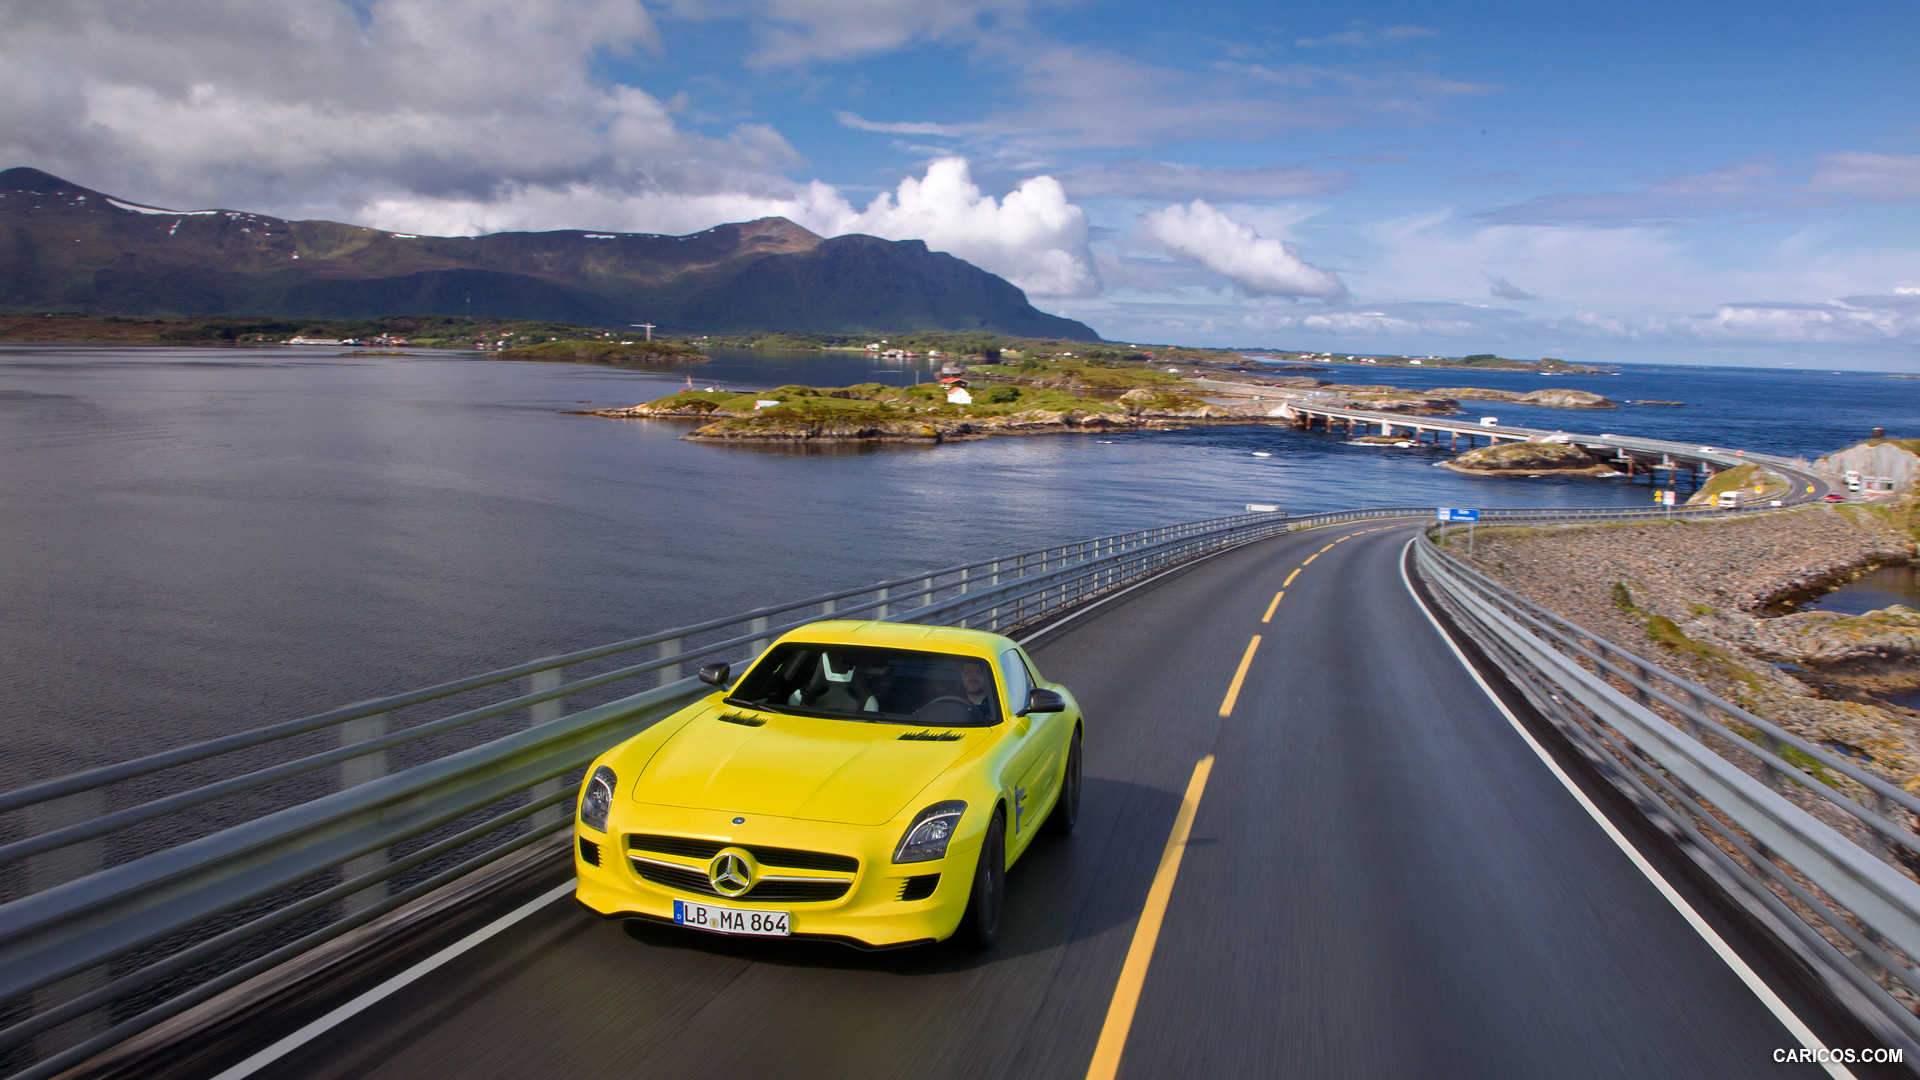 Mercedes-Benz SLS AMG E-CELL Concept  - Front, #24 of 60